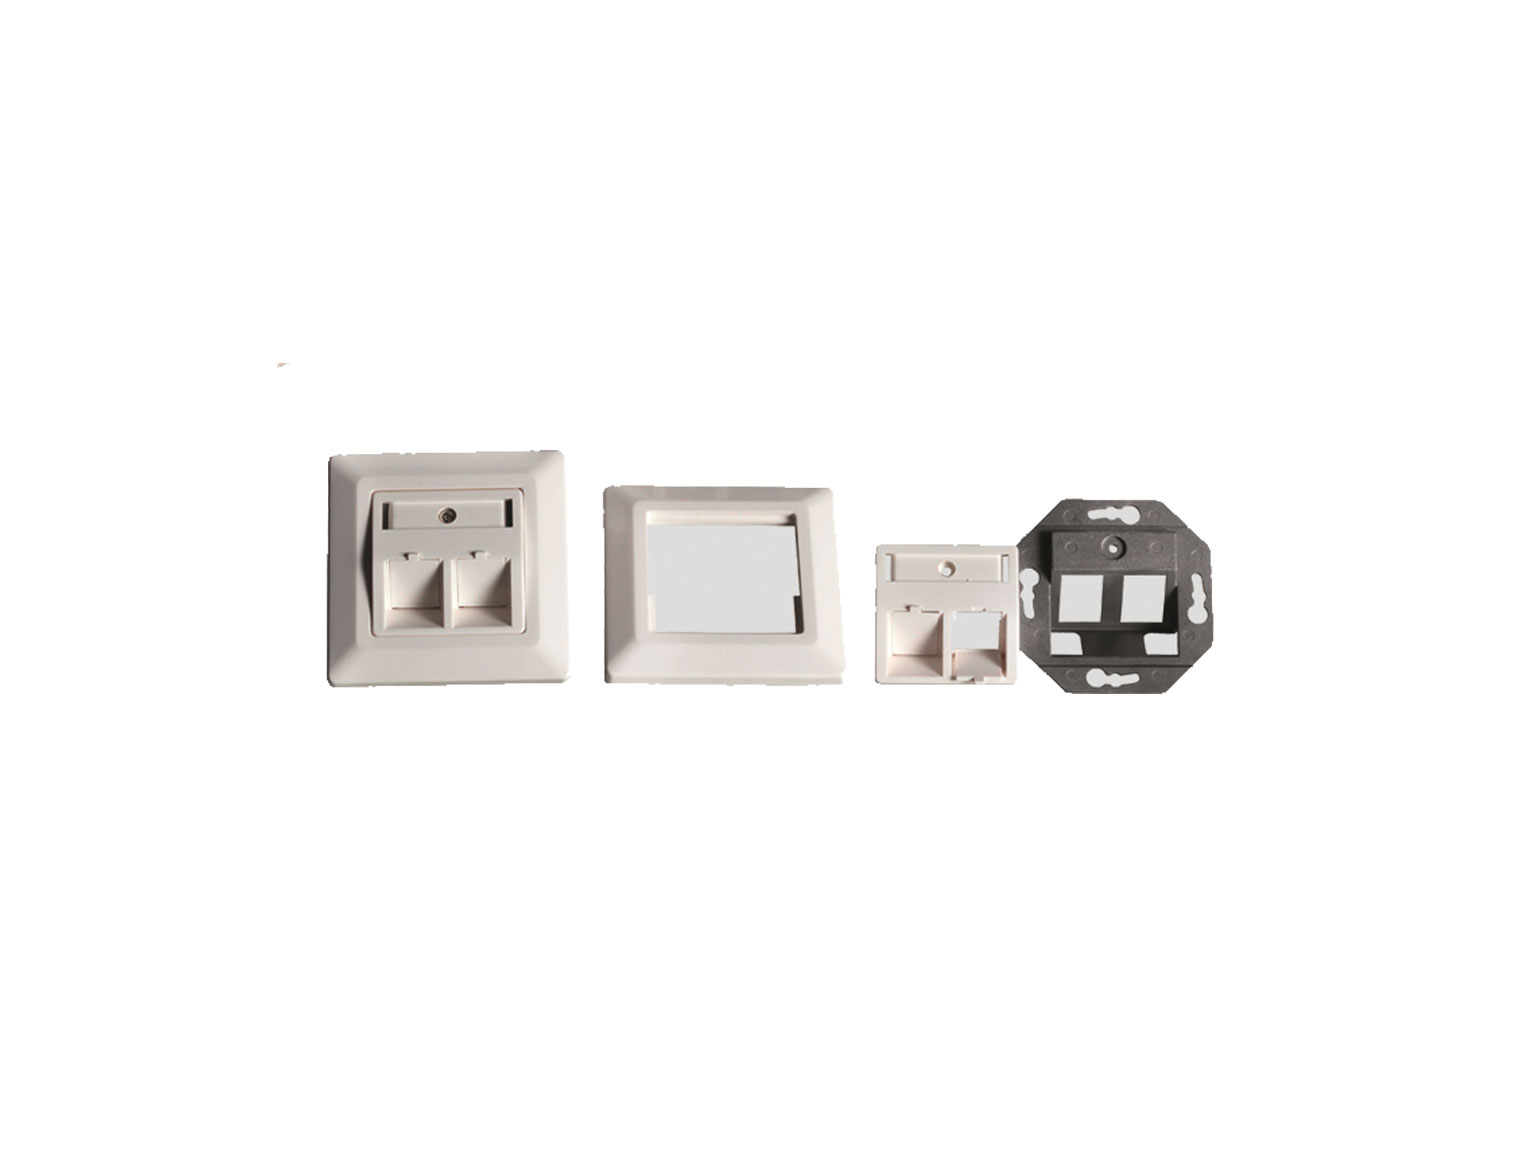 RJ45 Outlet support for module max. 2 modules